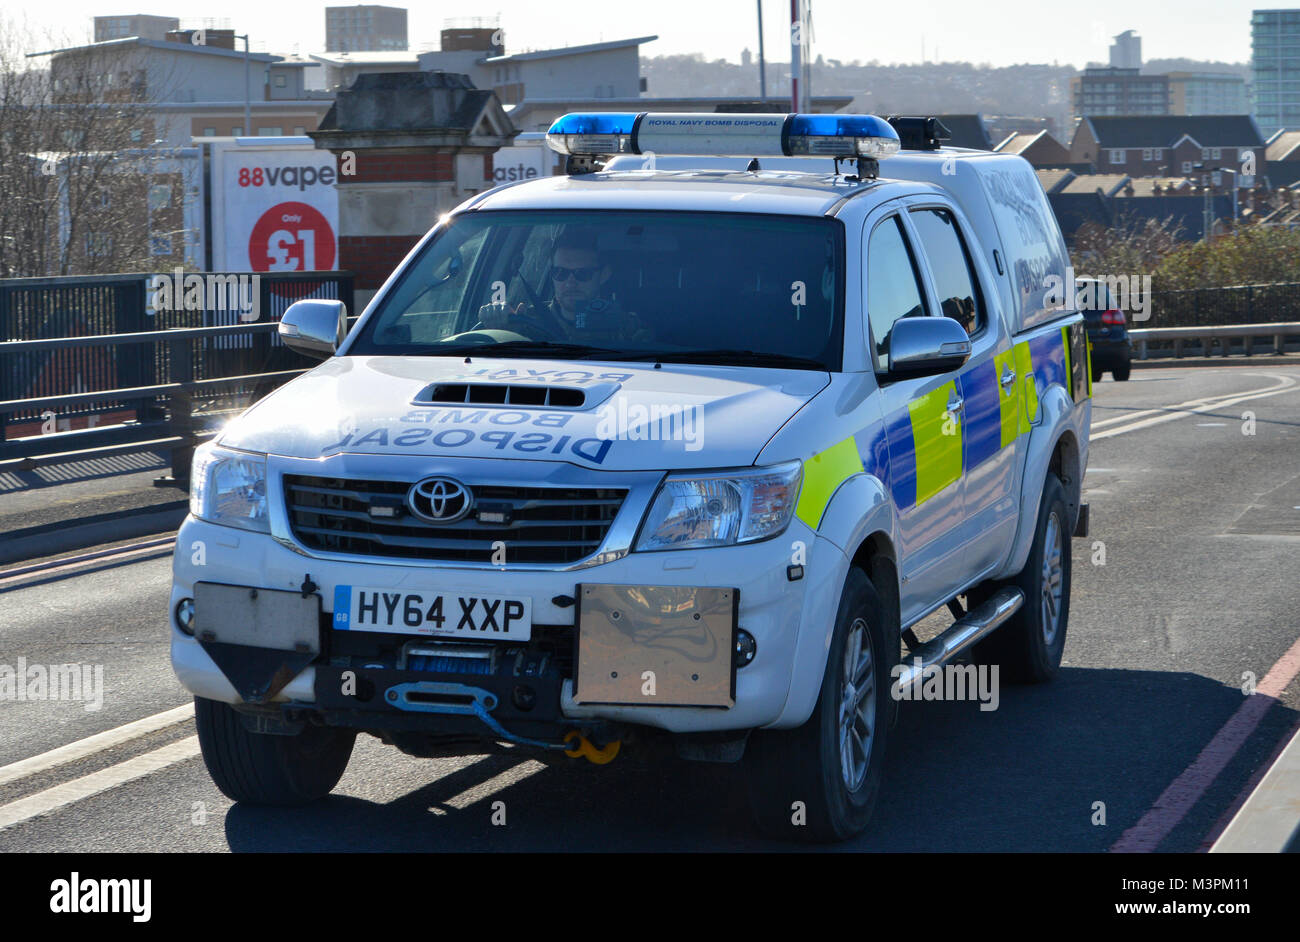 London, UK, 12th February 2018 Royal Navy Bomb Squad attending to World War II unexploded bomb incident at London City Airport in London’s Royal Docks Credit: A Christy/Alamy Live News. Stock Photo